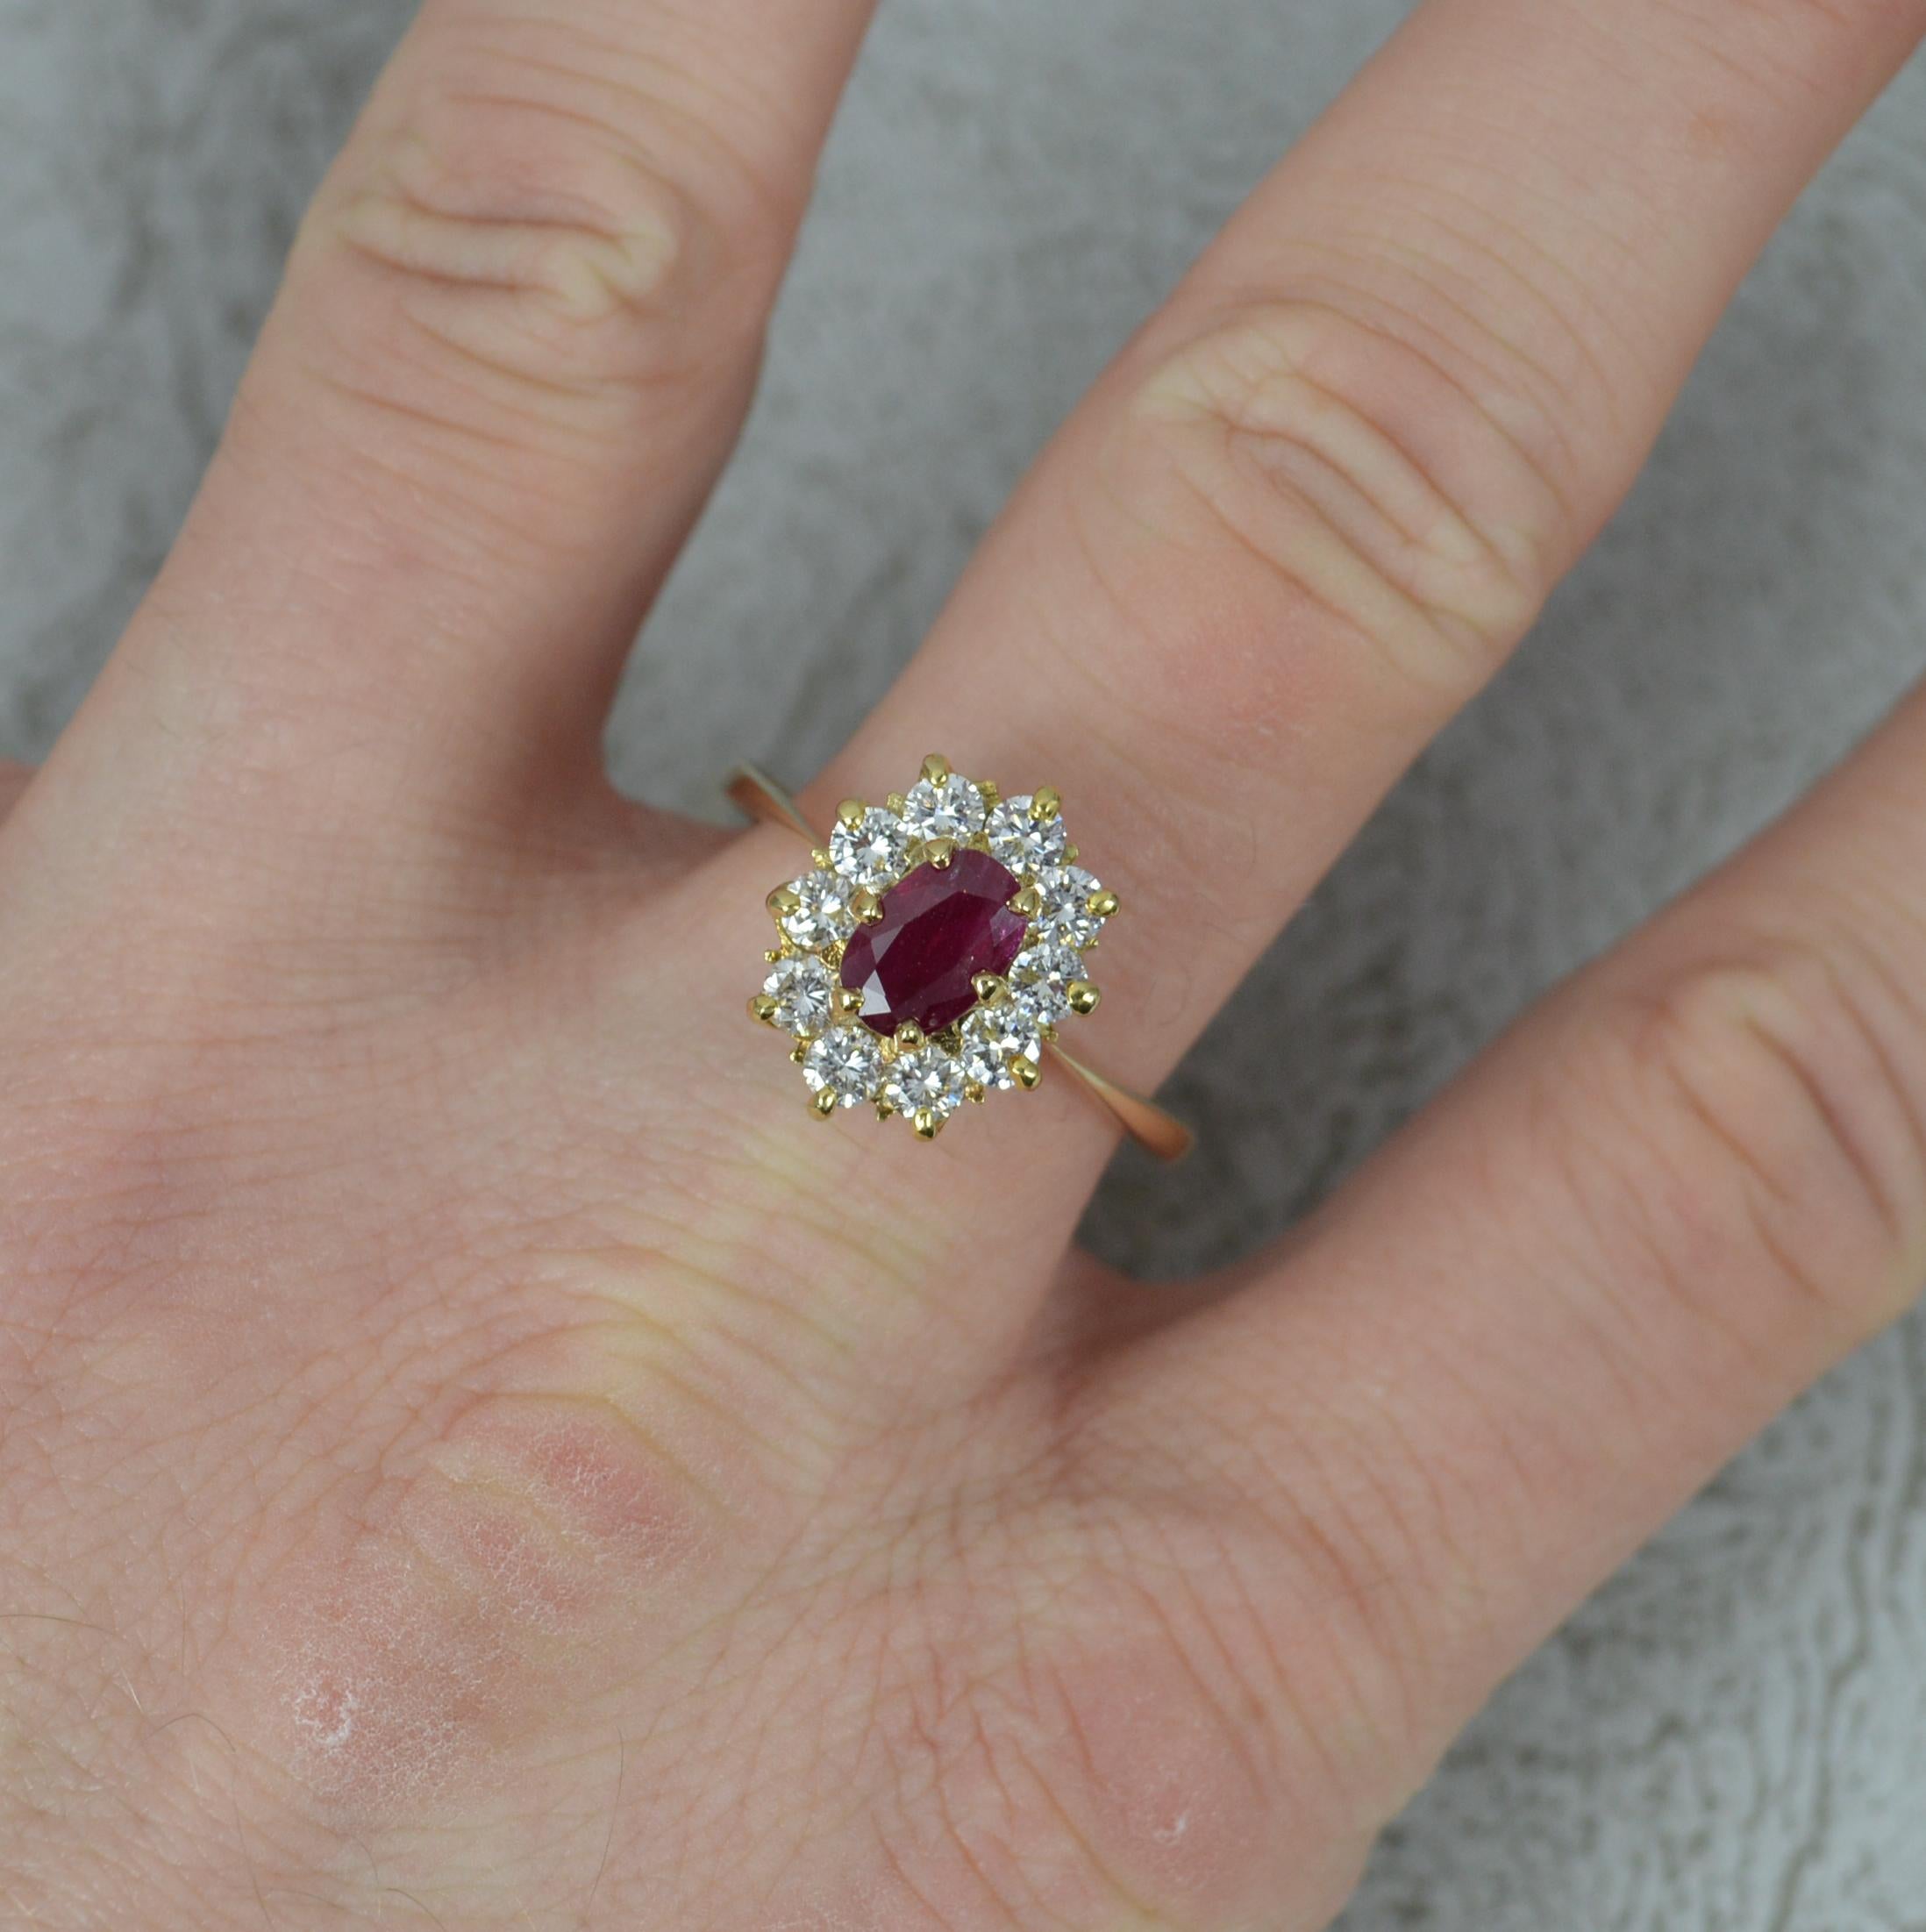 A classically designed cluster ring.
Solid 18 carat yellow gold example.
Set with an oval cut ruby in four claw setting. 4.6mm x 7.2mm. 
Surrounding are ten natural round brilliant cut diamonds to total approx 0.8-0.9 carat.
11.2mm x 13.7mm cluster